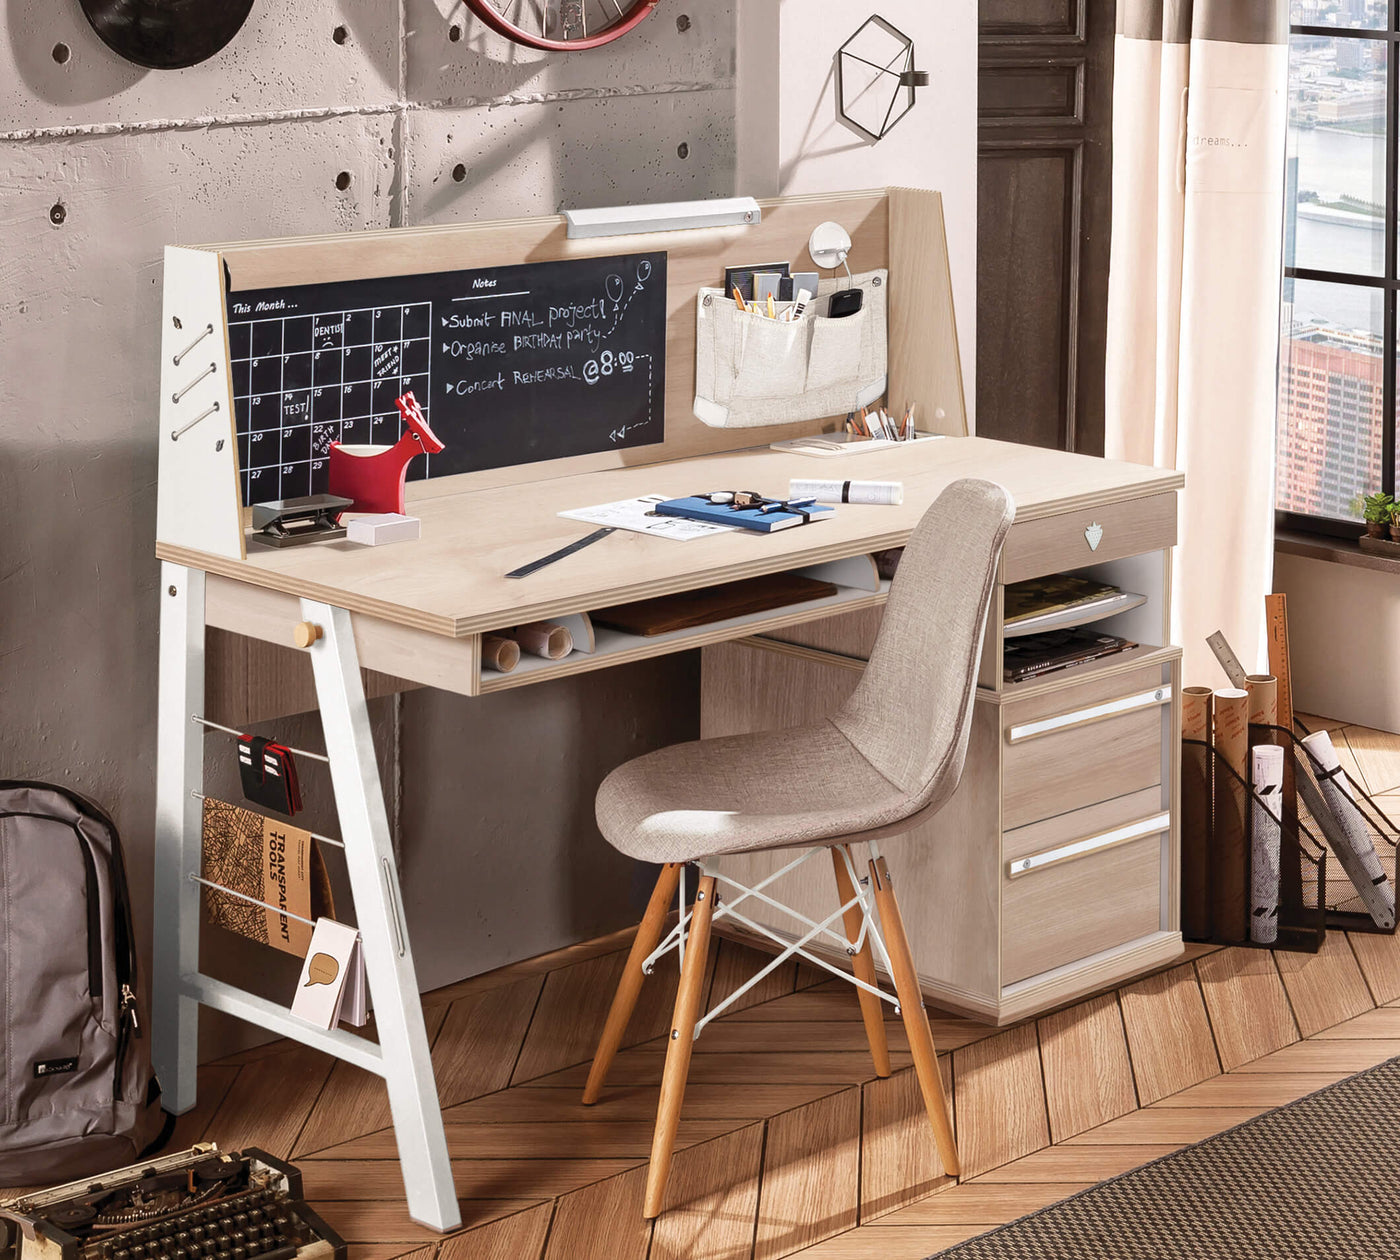 Duo Large Study Desk - ON ORDER ONLY